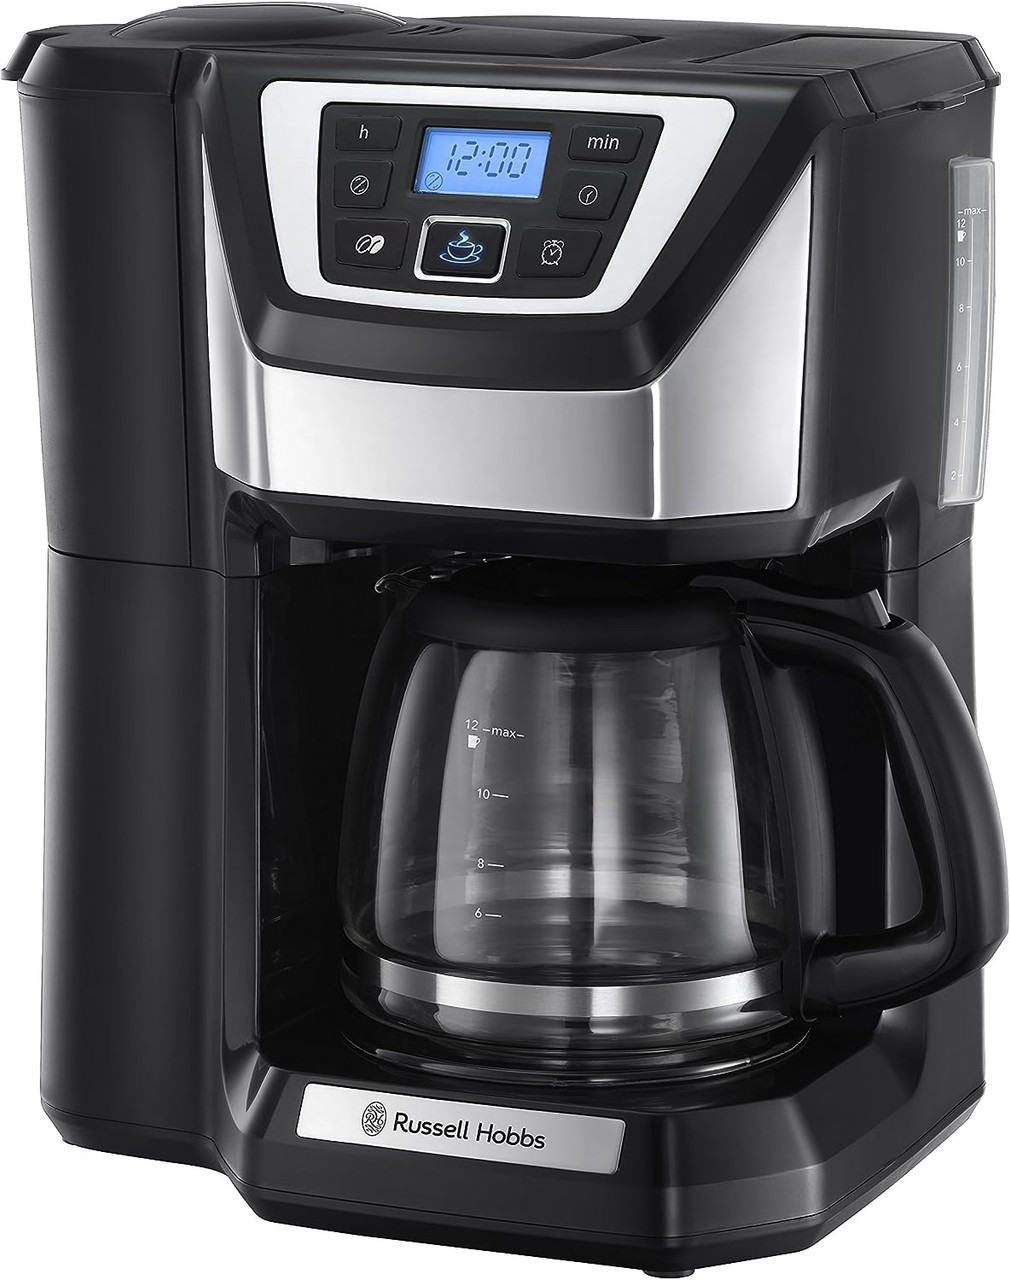 https://cdn11.bigcommerce.com/s-8ek7z3h3jn/images/stencil/1280x1280/products/9291/52215/russell-hobbs-chester-grind-and-brew-coffee-machine-or-22000__59722.1694675701.jpg?c=1